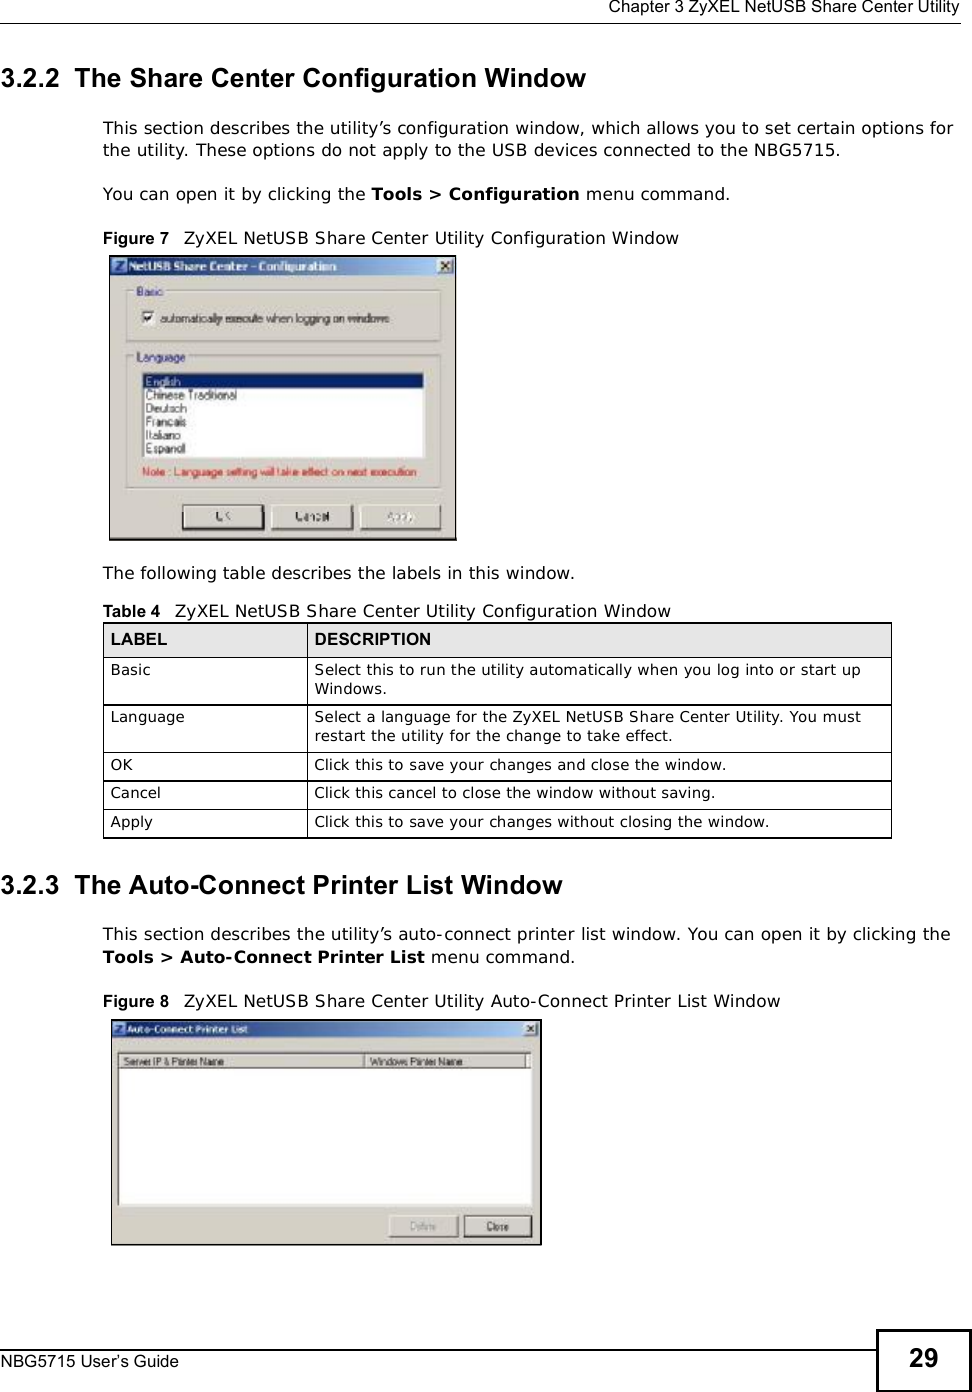  Chapter 3ZyXEL NetUSB Share Center UtilityNBG5715 User’s Guide 293.2.2  The Share Center Configuration WindowThis section describes the utility’s configuration window, which allows you to set certain options for the utility. These options do not apply to the USB devices connected to the NBG5715. You can open it by clicking the Tools &gt; Configuration menu command.Figure 7   ZyXEL NetUSB Share Center Utility Configuration WindowThe following table describes the labels in this window.3.2.3  The Auto-Connect Printer List WindowThis section describes the utility’s auto-connect printer list window. You can open it by clicking the Tools &gt; Auto-Connect Printer List menu command.Figure 8   ZyXEL NetUSB Share Center Utility Auto-Connect Printer List WindowTable 4   ZyXEL NetUSB Share Center Utility Configuration WindowLABEL DESCRIPTIONBasicSelect this to run the utility automatically when you log into or start up Windows.LanguageSelect a language for the ZyXEL NetUSB Share Center Utility. You must restart the utility for the change to take effect.OKClick this to save your changes and close the window.CancelClick this cancel to close the window without saving.ApplyClick this to save your changes without closing the window.